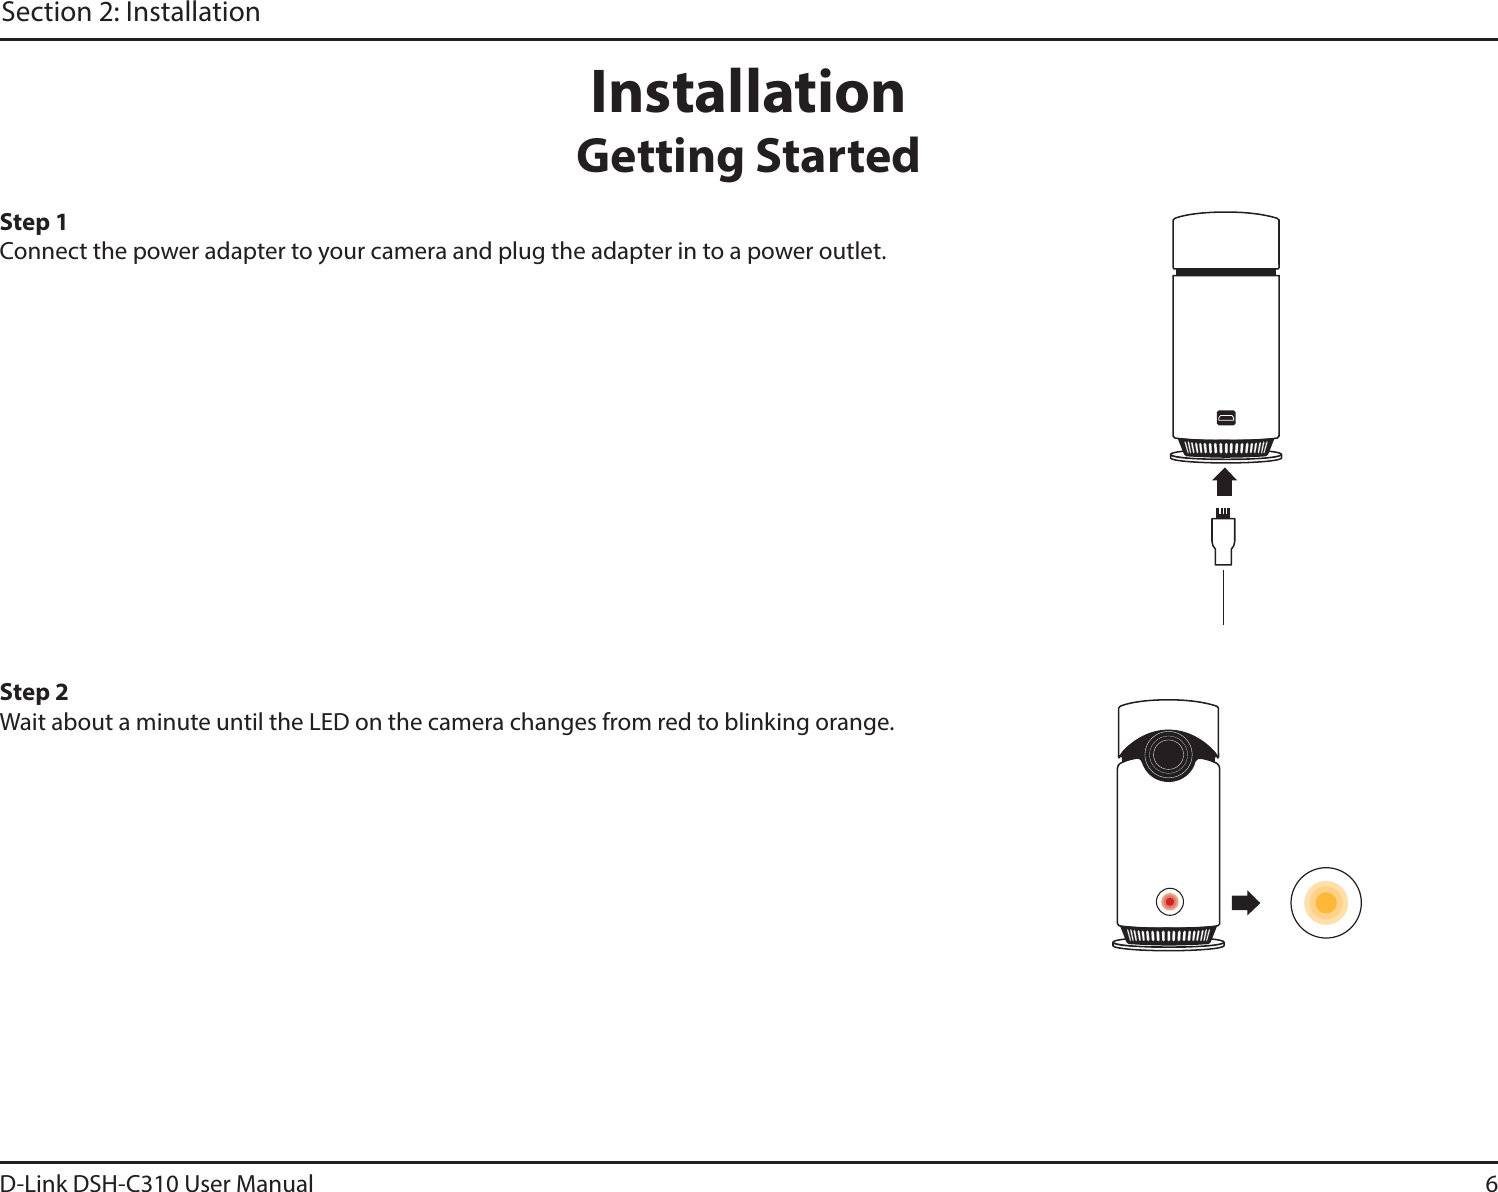 6D-Link DSH-C310 User ManualSection 2: InstallationInstallationGetting StartedStep 1Connect the power adapter to your camera and plug the adapter in to a power outlet. Step 2Wait about a minute until the LED on the camera changes from red to blinking orange. 